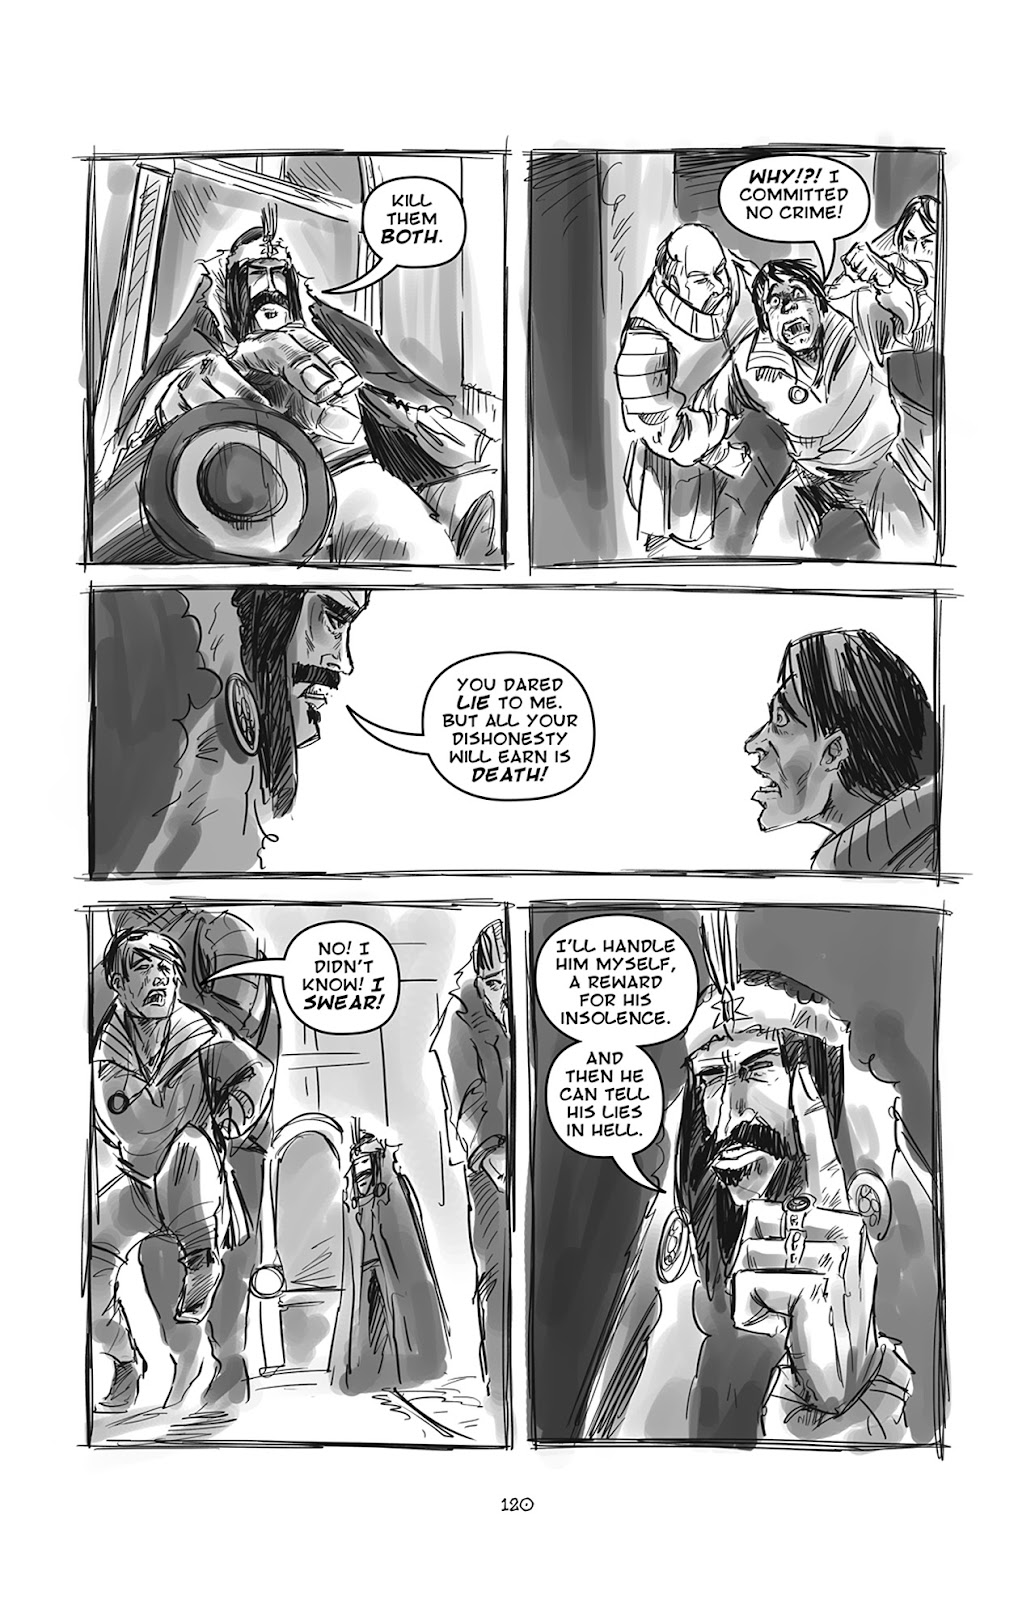 Pinocchio: Vampire Slayer - Of Wood and Blood issue 5 - Page 21